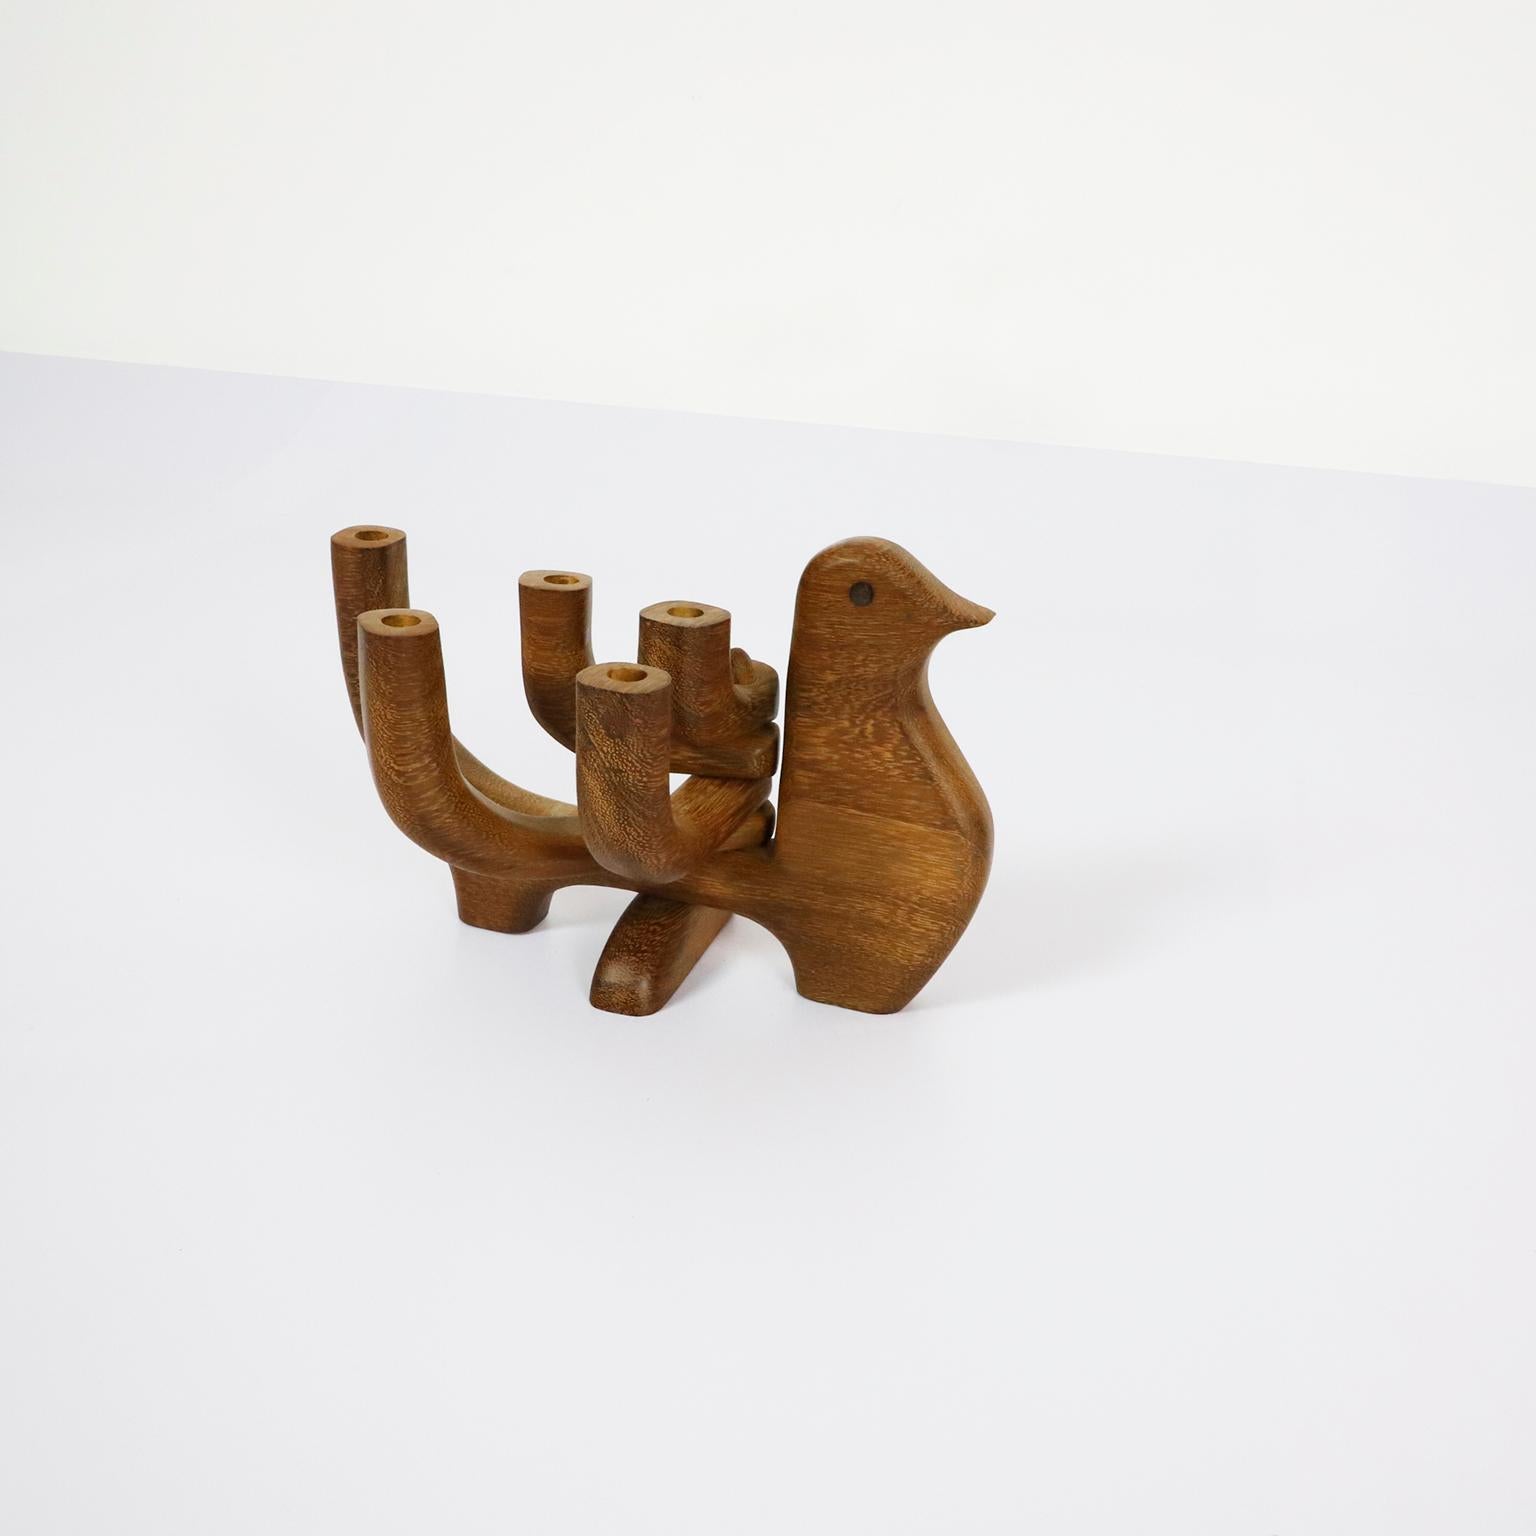 Circa 1960, we offer this Danish mid century 5 candle holder teak wood. This is a great danish bird shaped adjustable candle holder that holds 5 thin taper candles.